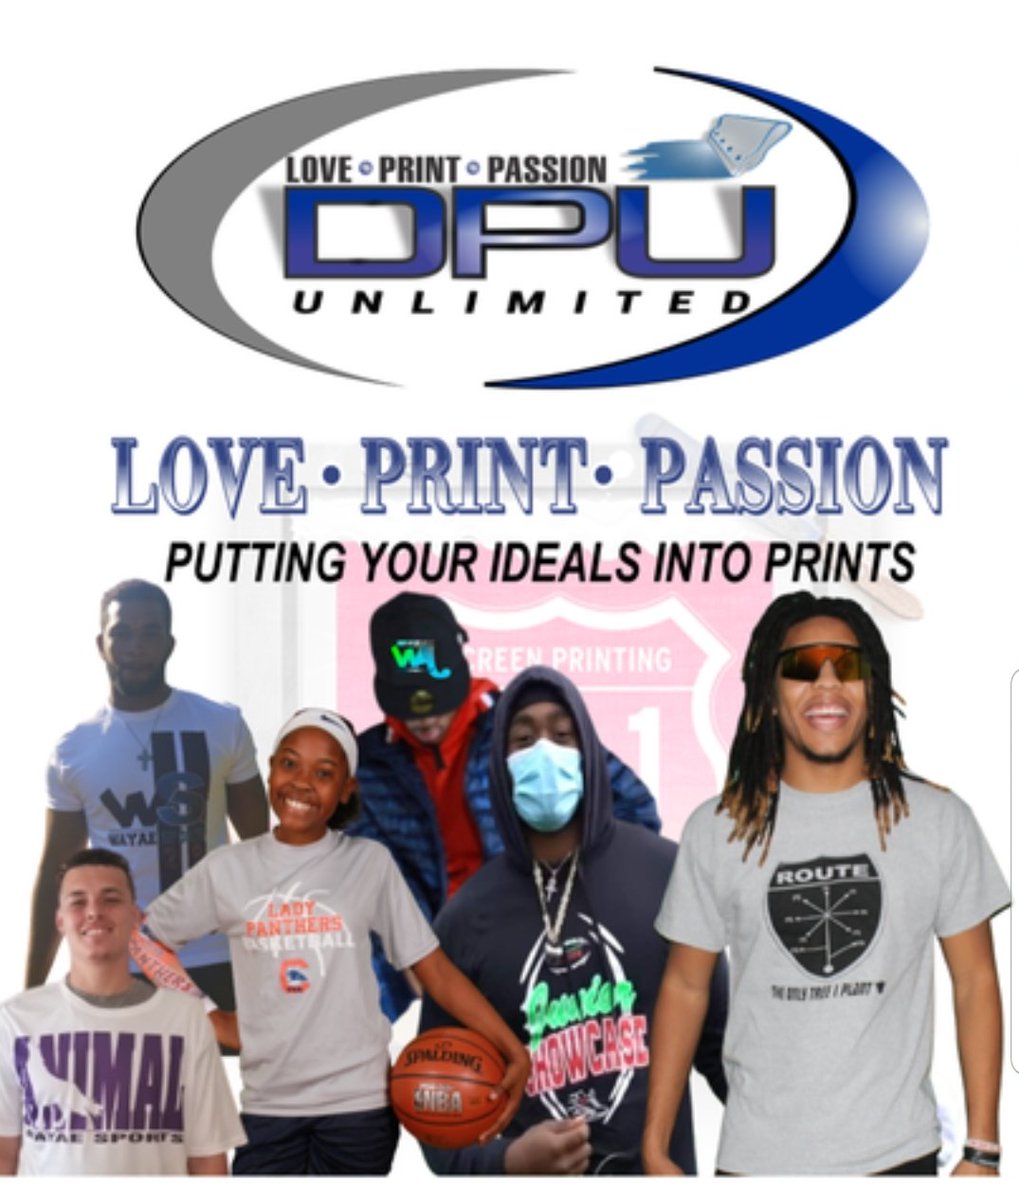 Rebranding of our Logo and Grand Opening of our Website. We would love to thank everyone for their support of DUB PRINTS UNLIMITED. Check us out now at dubprintlife.com